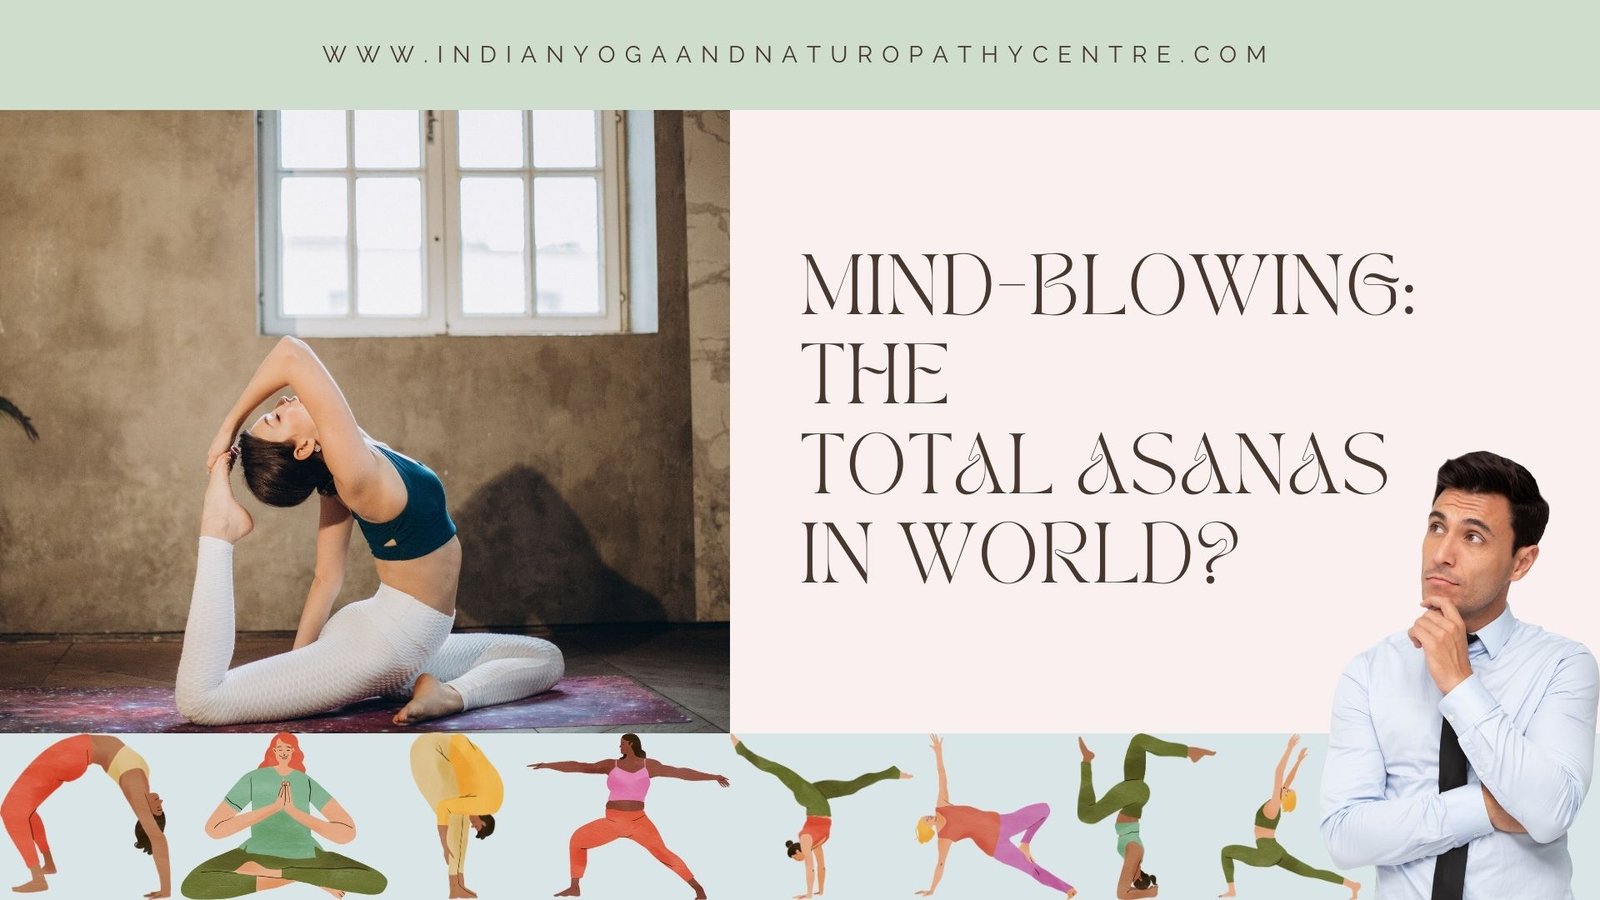 Mind-Blowing: The Total Asanas in World?